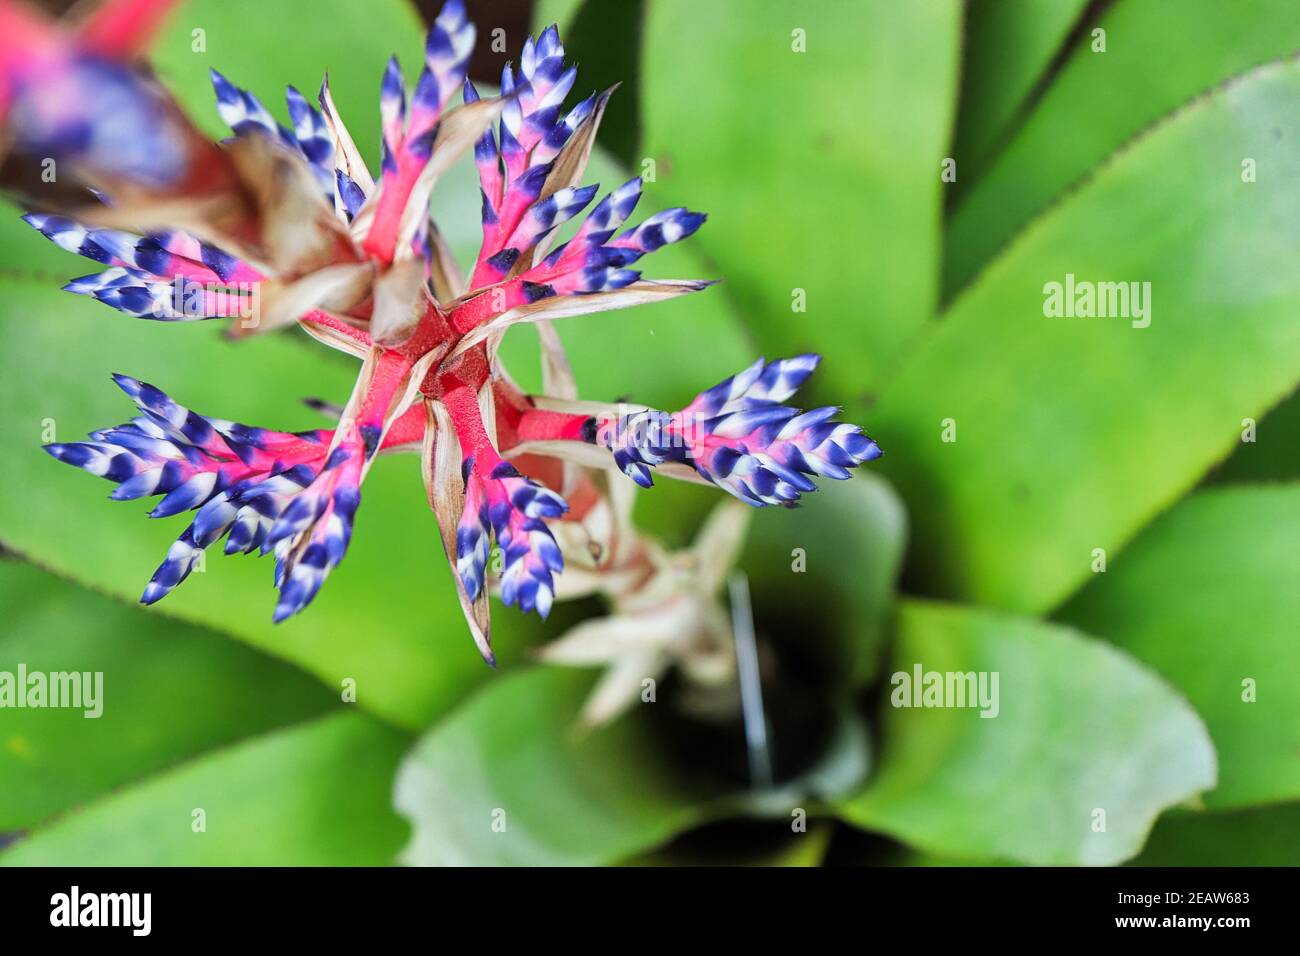 Top view of the flower spear of a del mar aechmea plant Stock Photo